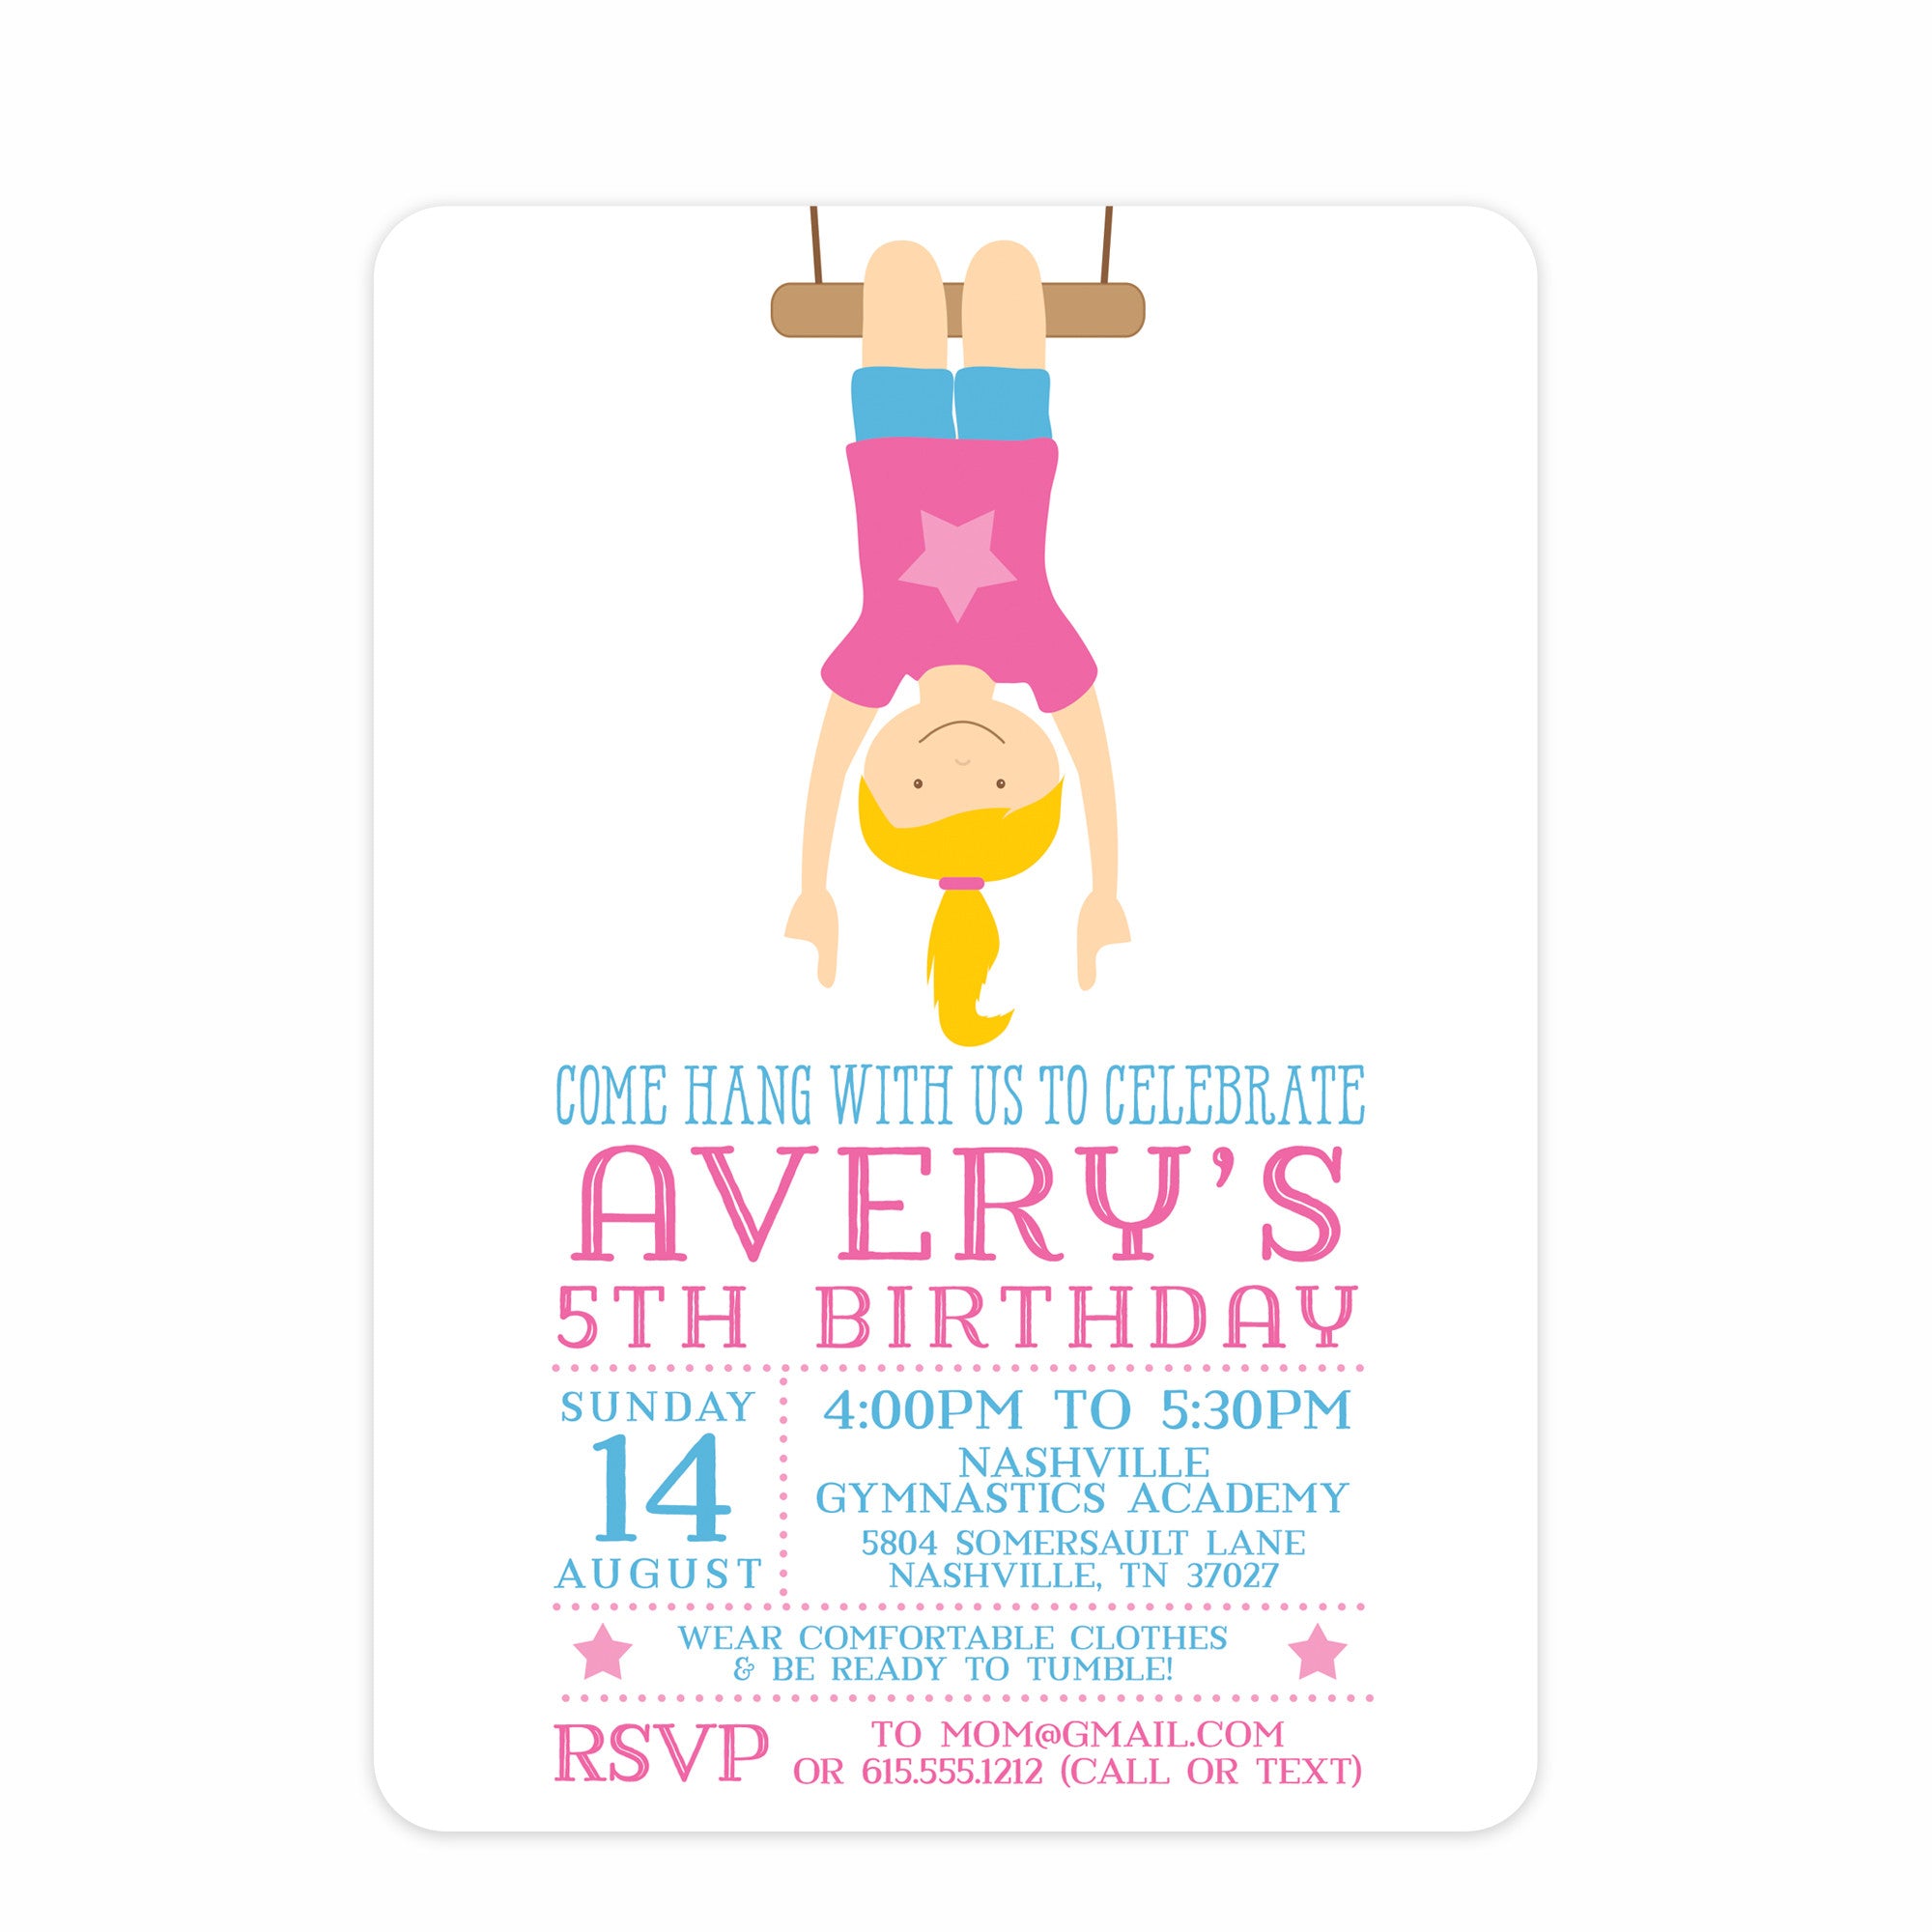 Gymnastics Birthday Party Invitation from Pipsy.com. Printed on heavyweight cardstock, front